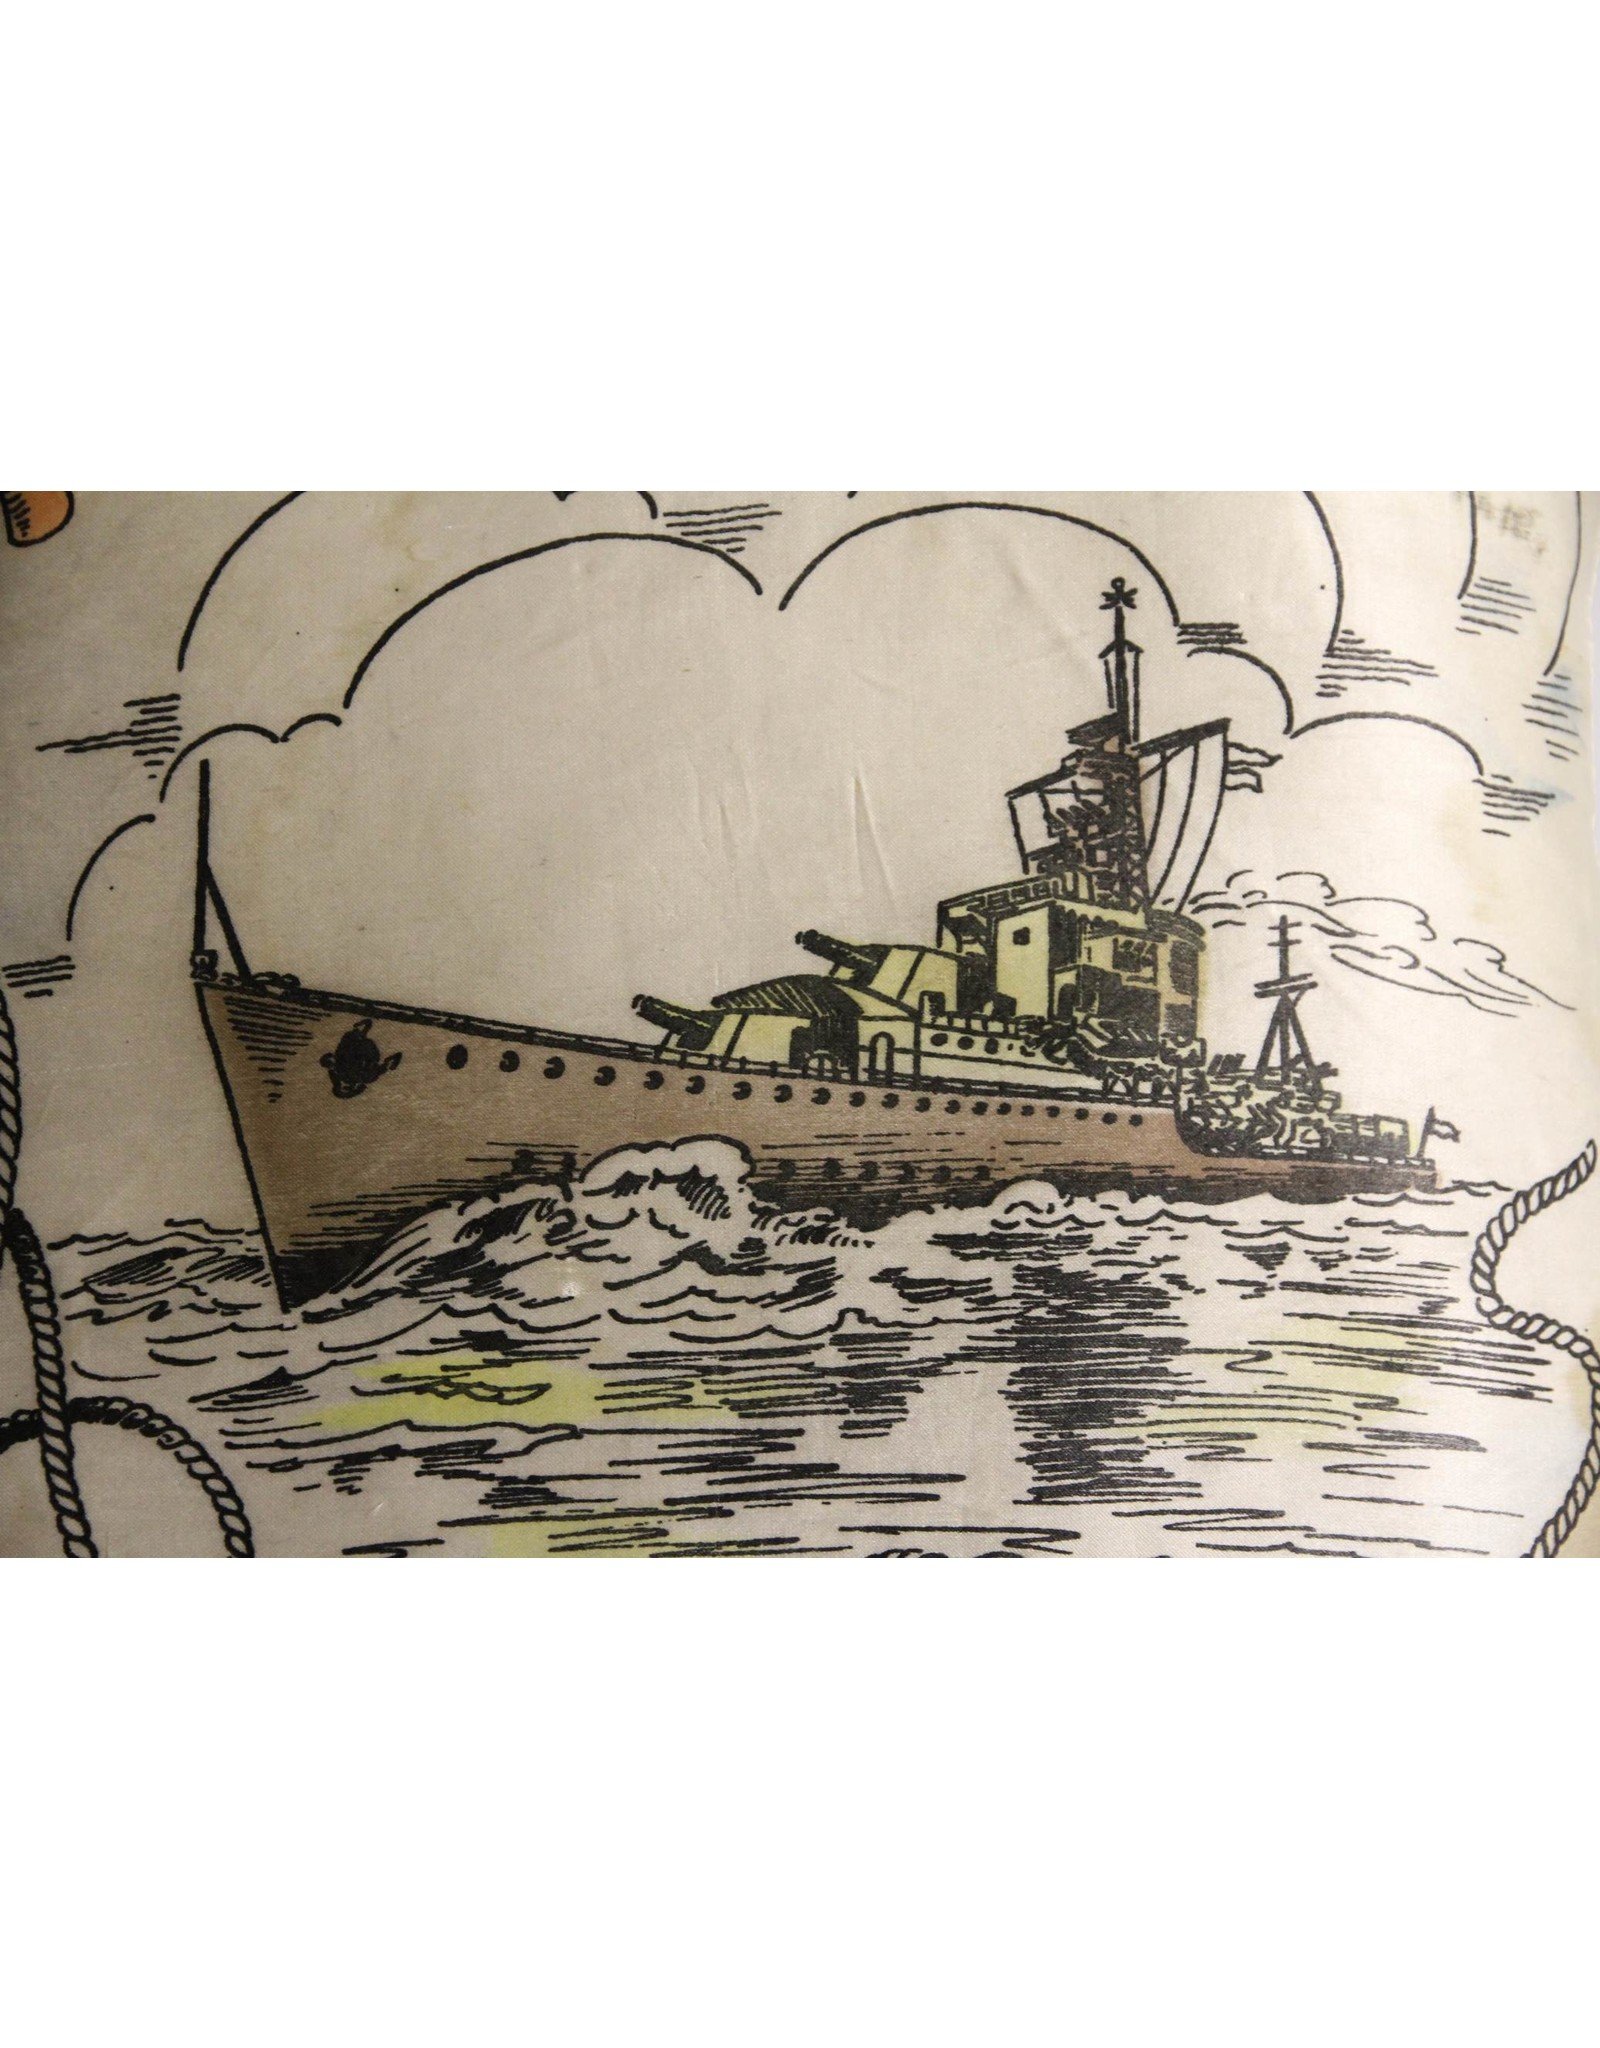 Sweetheart pillow - HMCS Ste. Therese